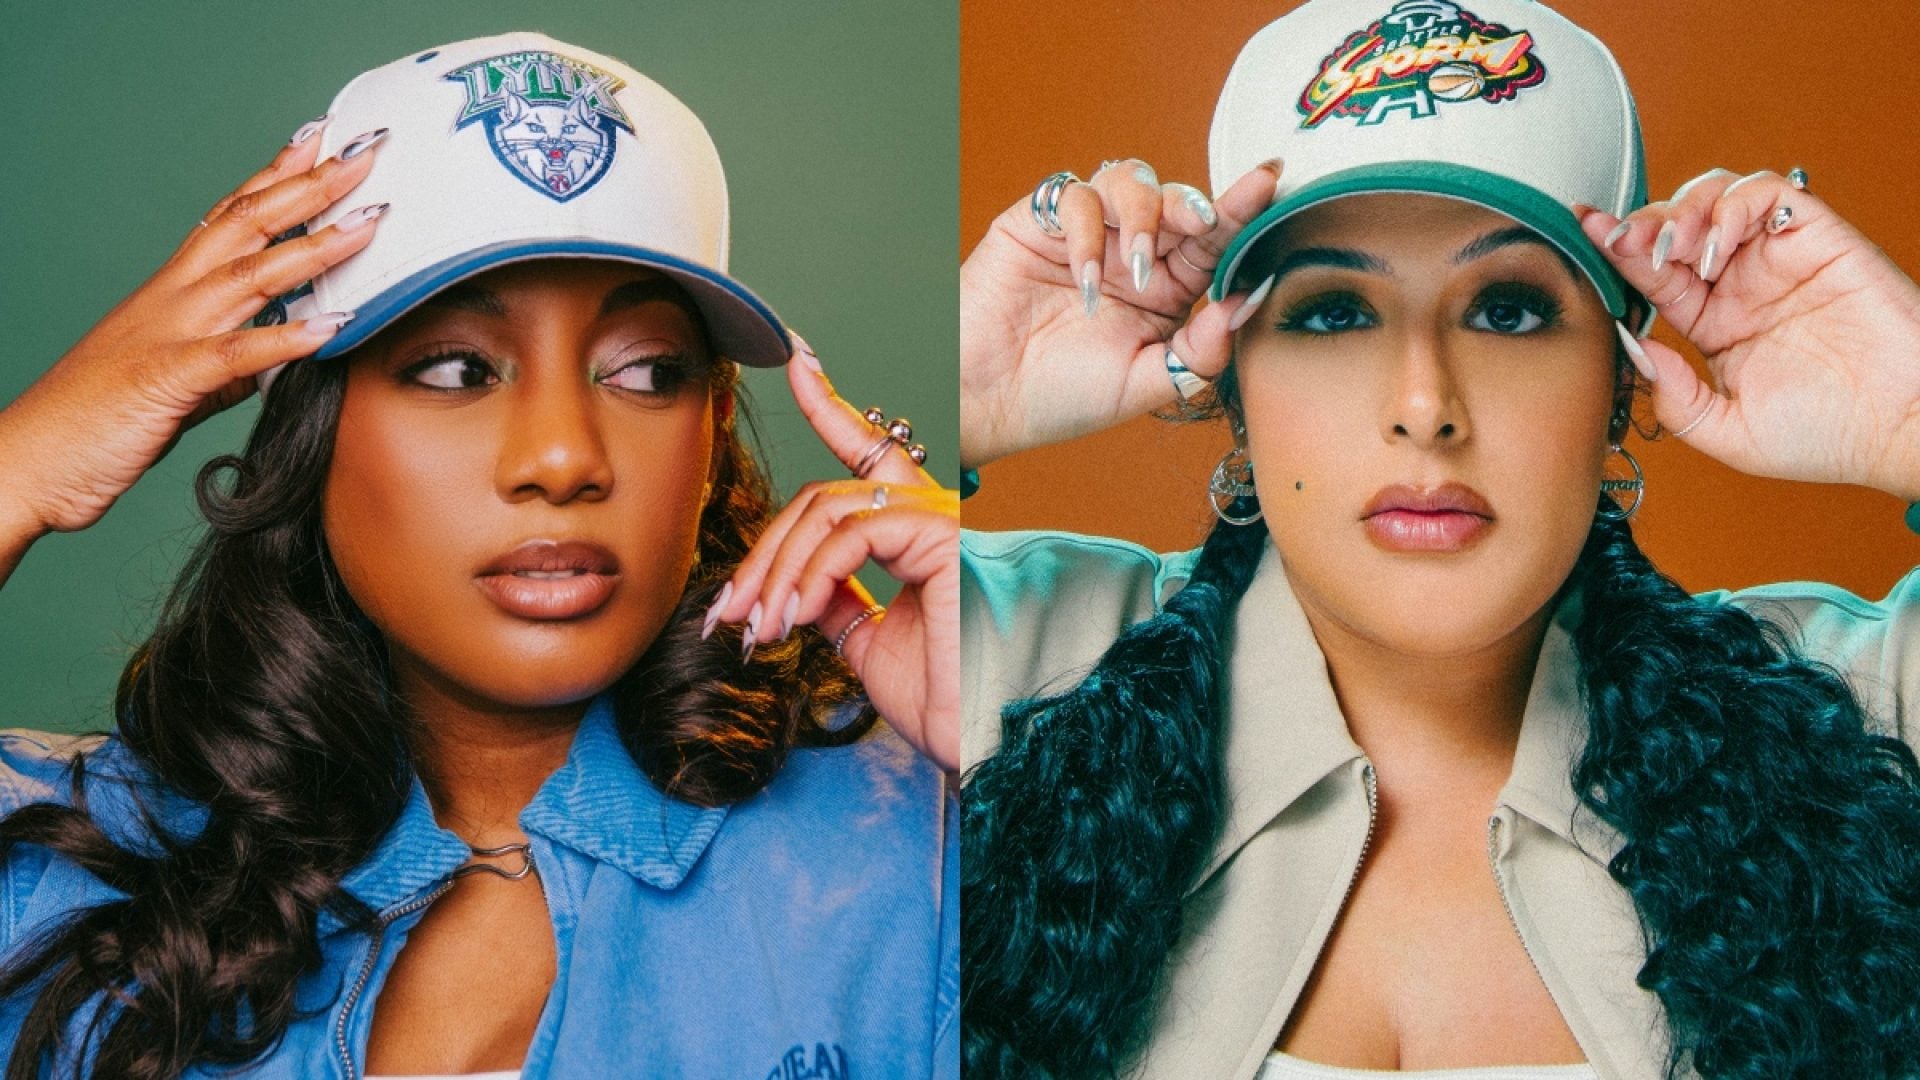 Made For The W Highlights The History Of Women’s Basketball With Exclusive Hat Collection